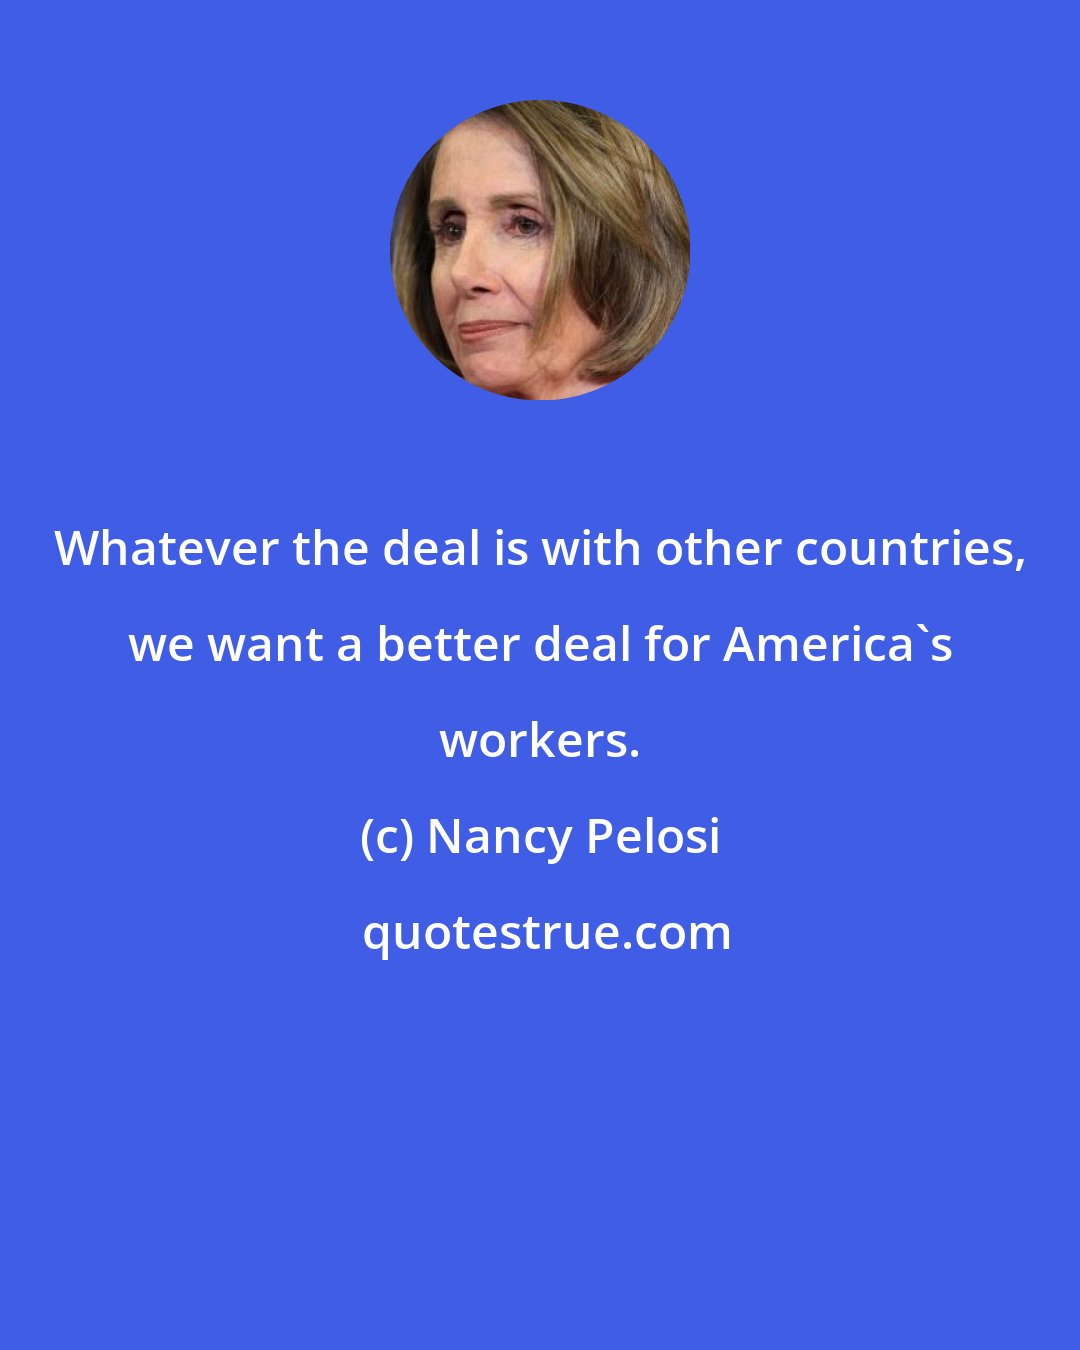 Nancy Pelosi: Whatever the deal is with other countries, we want a better deal for America's workers.